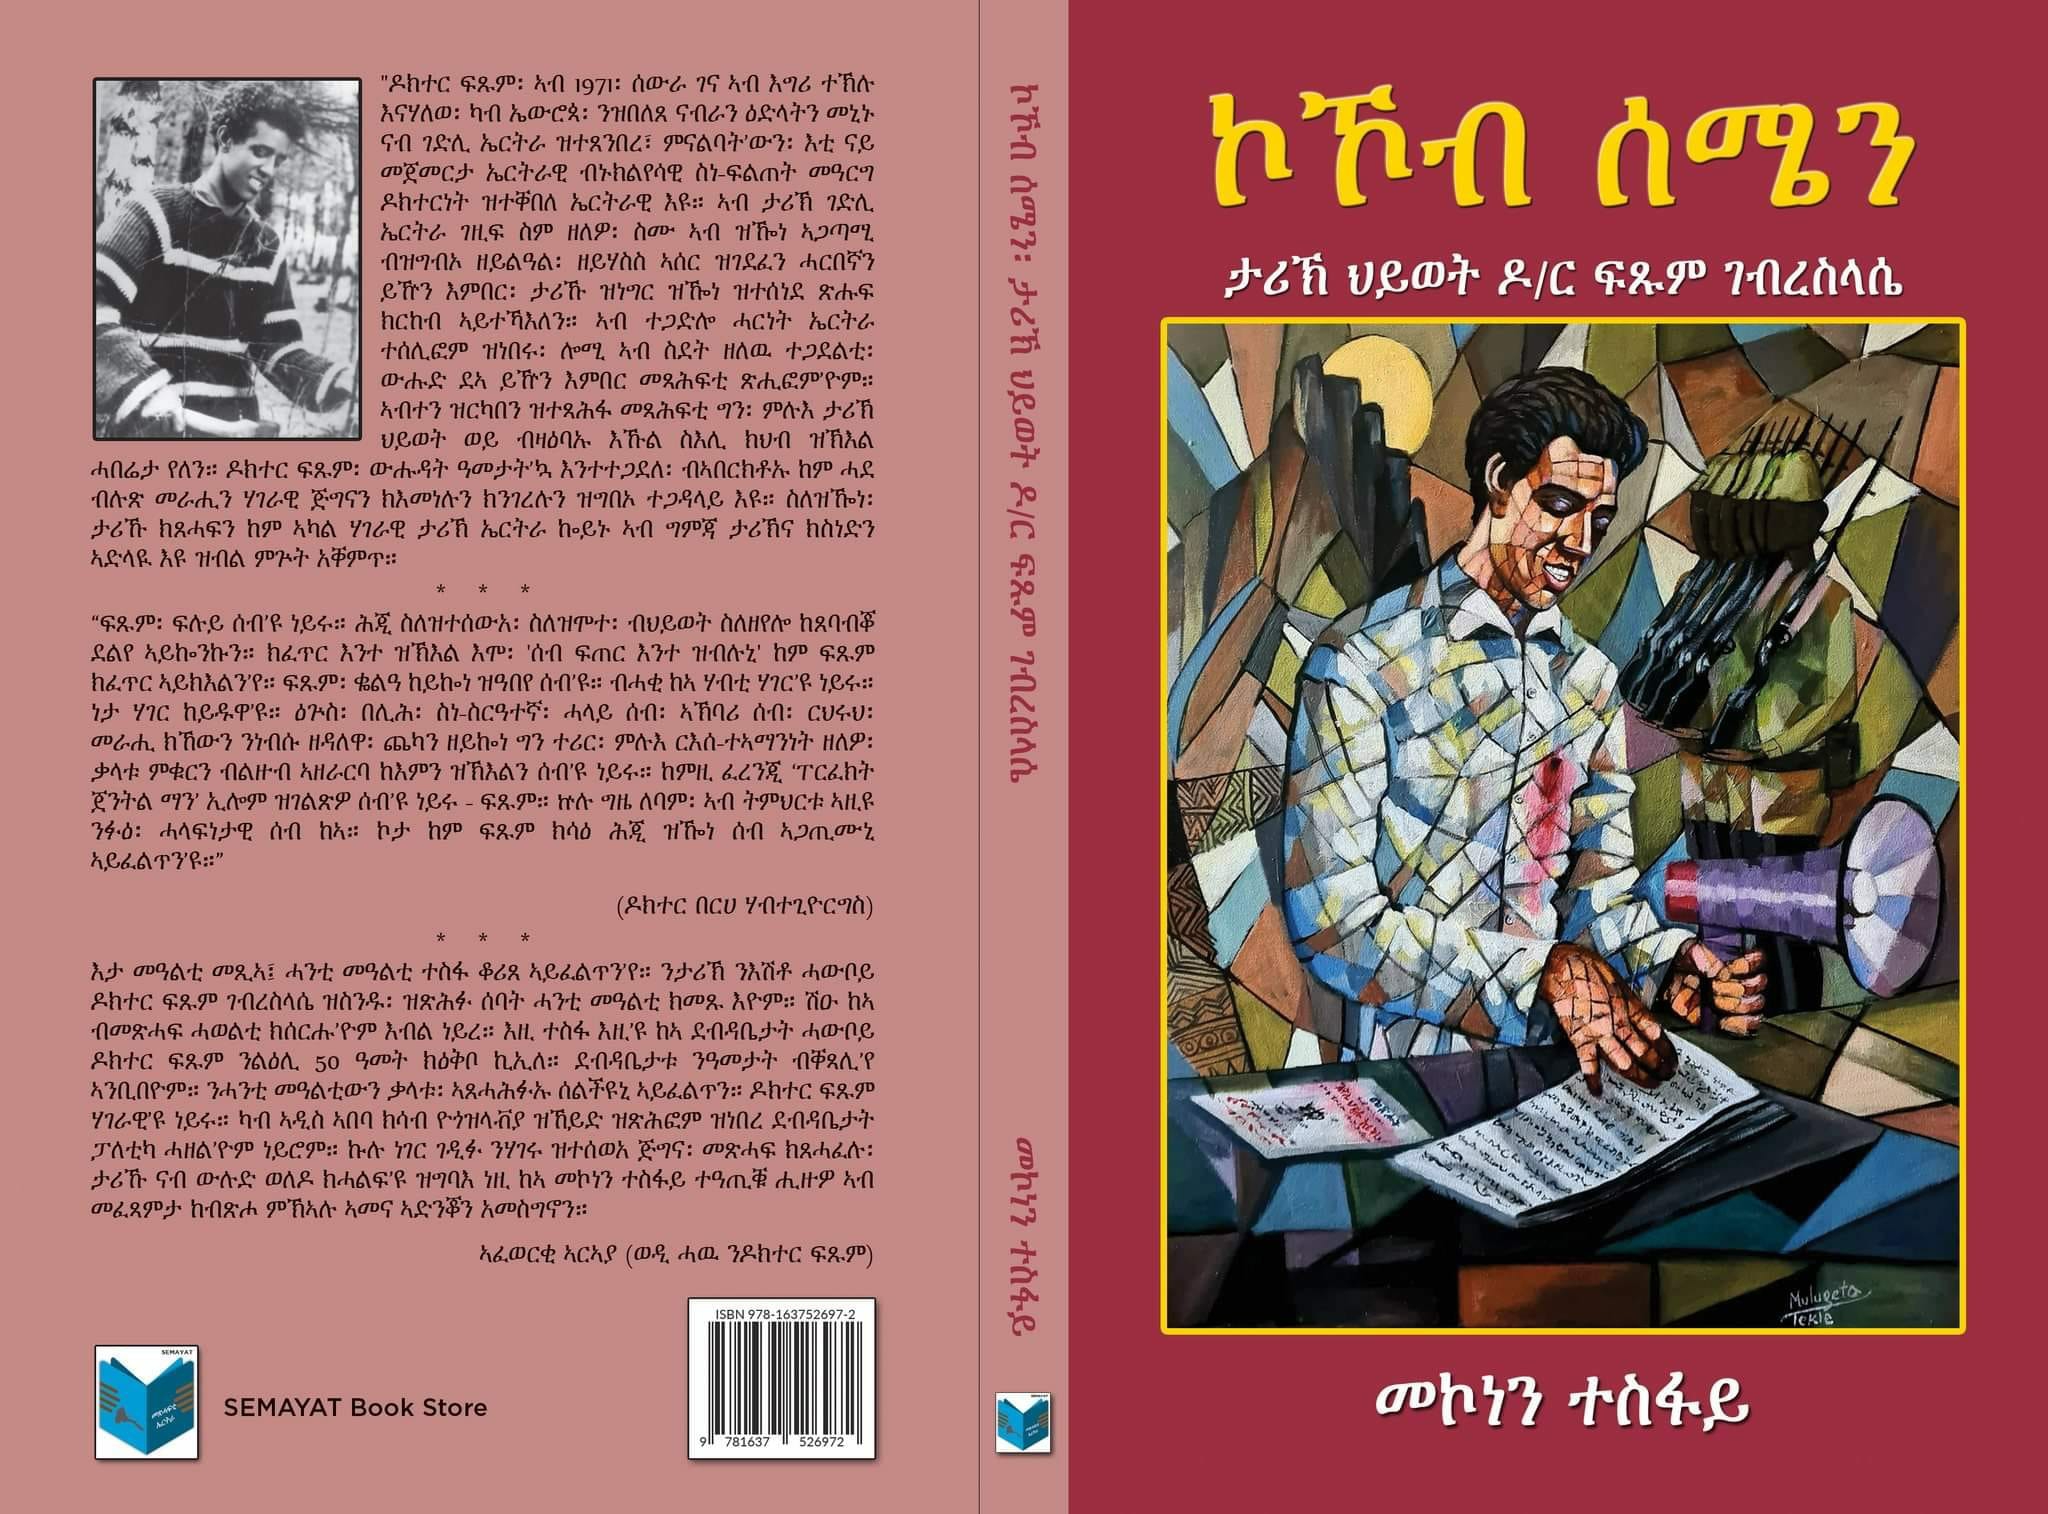 biography of Dr Fetsum Ghebreselassie, by Mekonnen Tesfay.